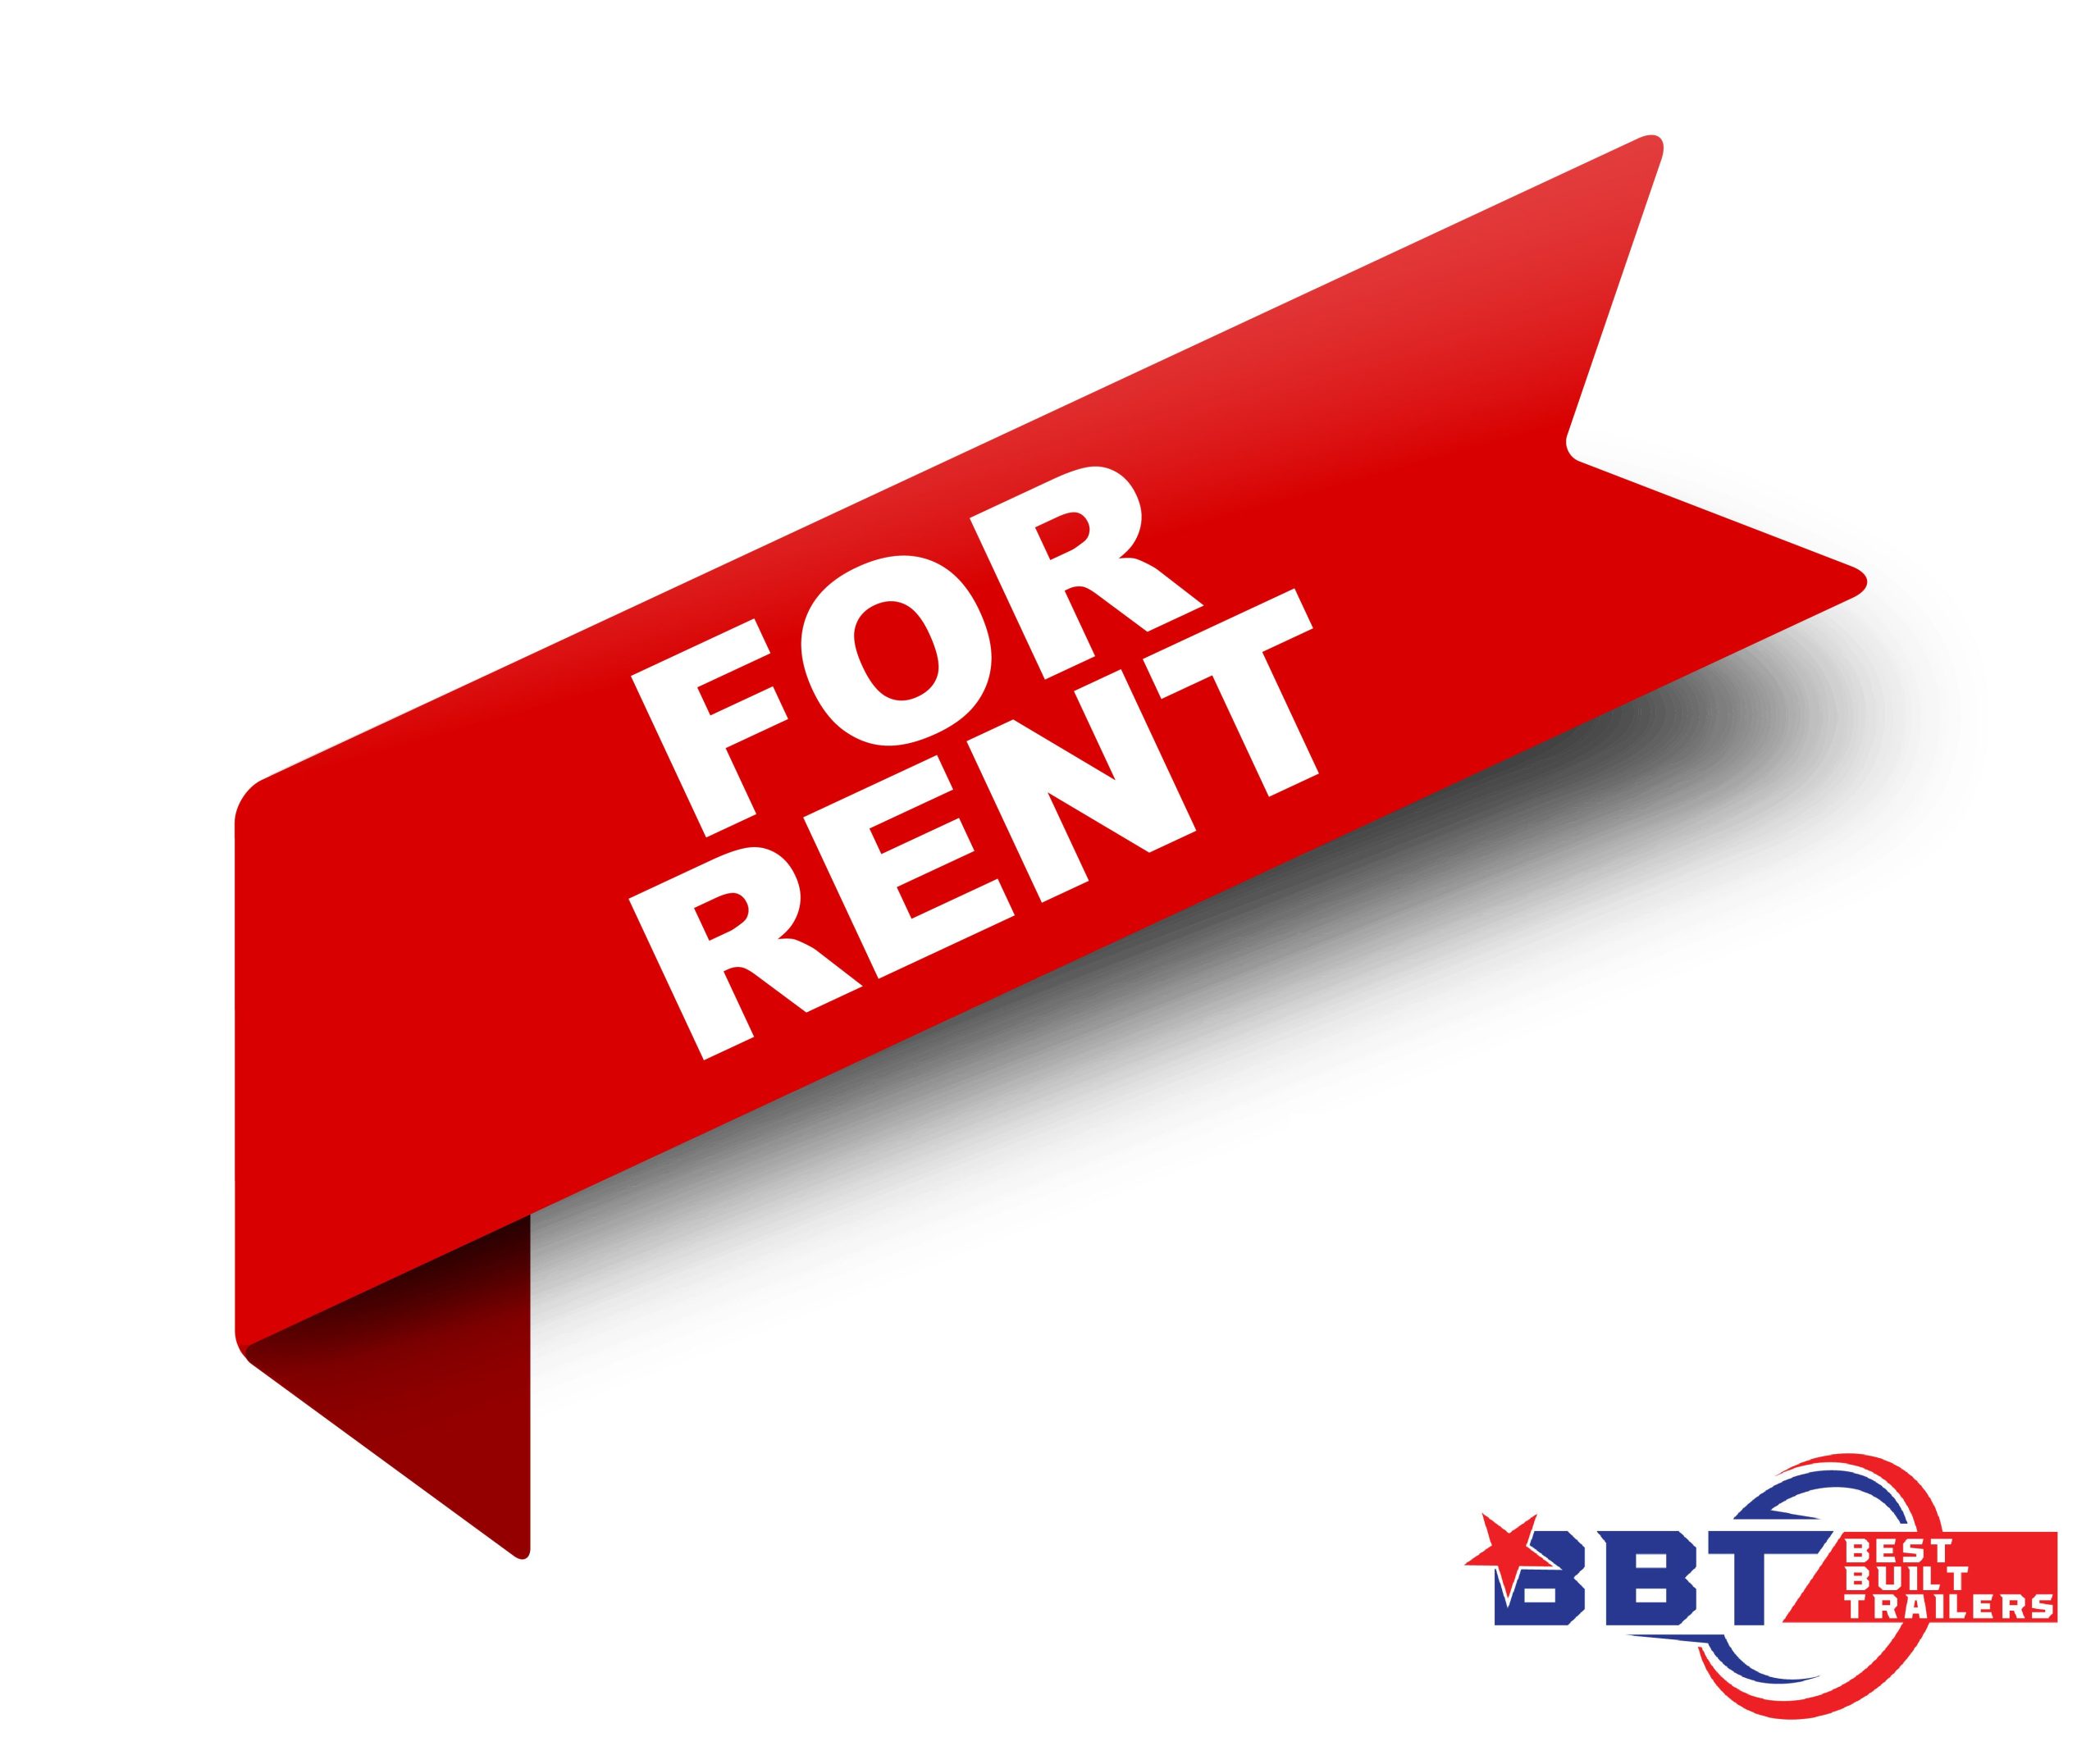 Search Through Our Trailers for Rent to Find One That’s Perfect for You!